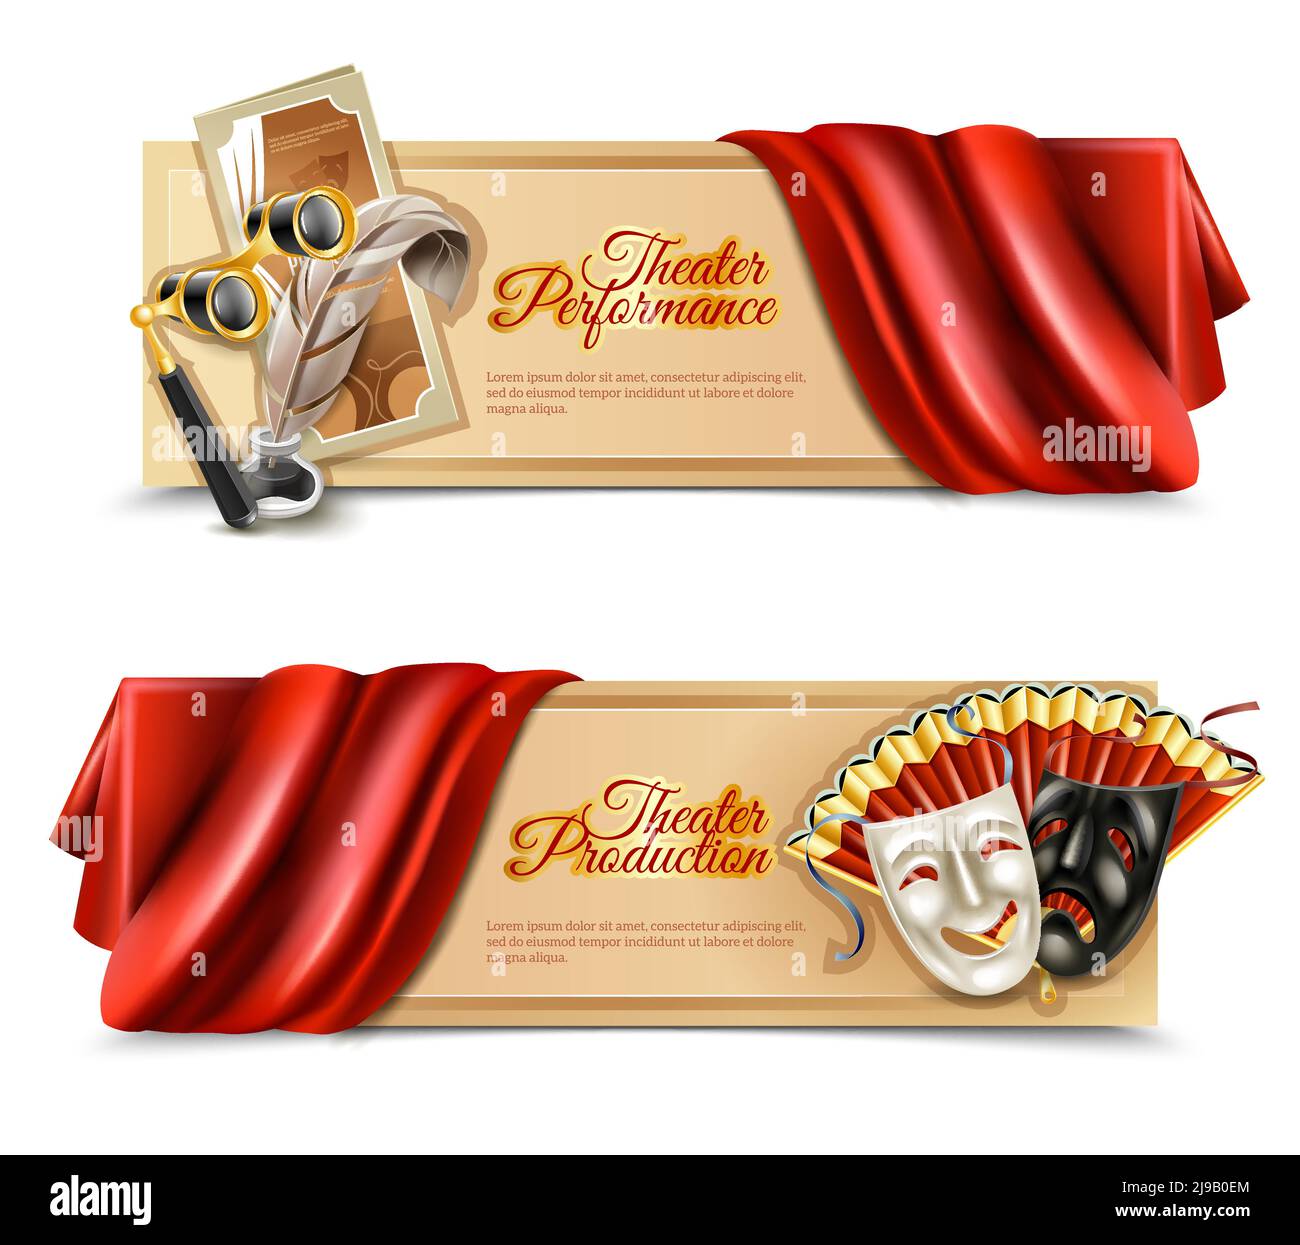 Theatre performance realistic horizontal banners set with curtain and masks isolated vector illustration Stock Vector